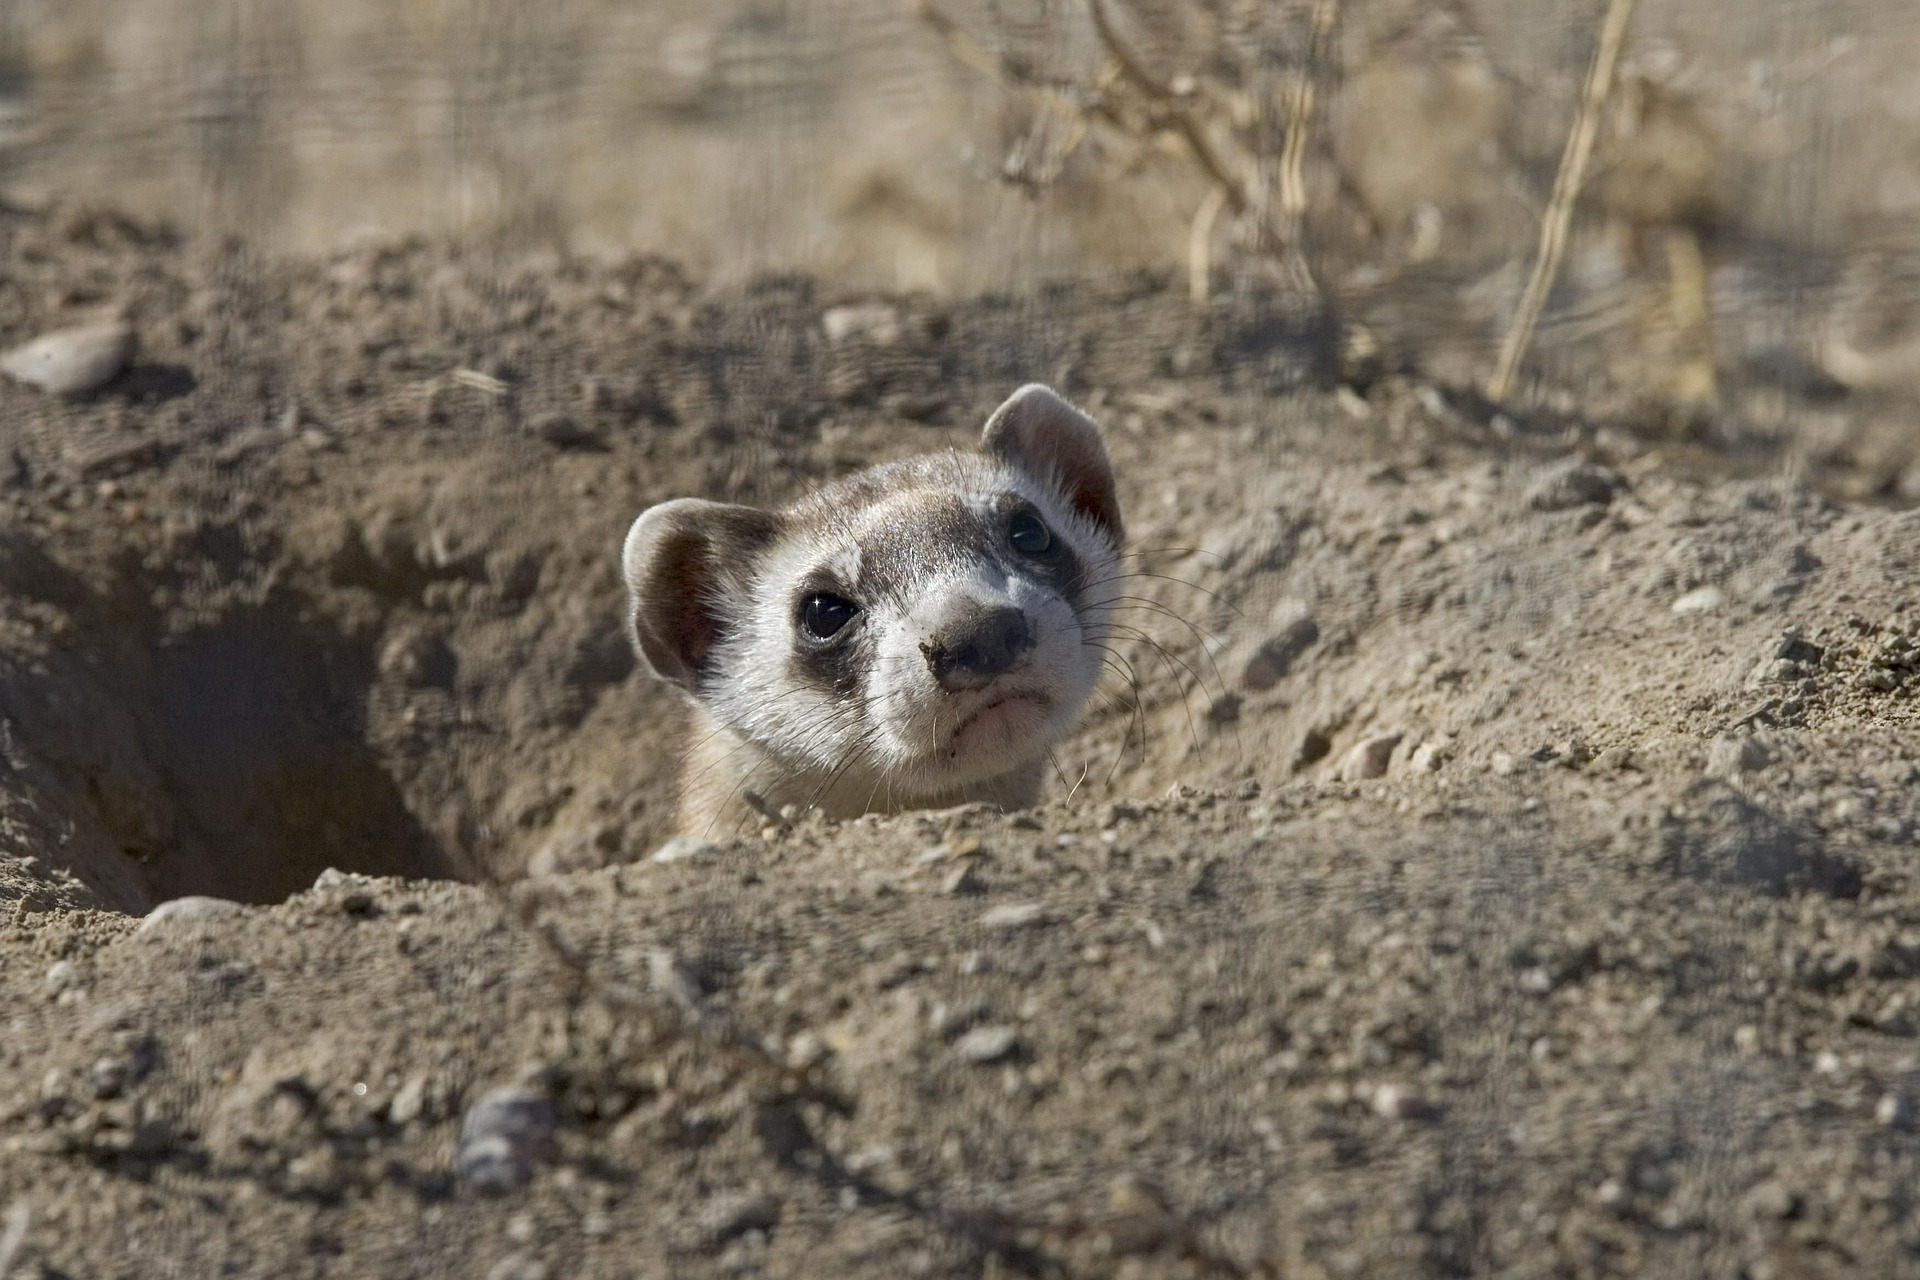 Black-footed ferrets are not on the endangered species list